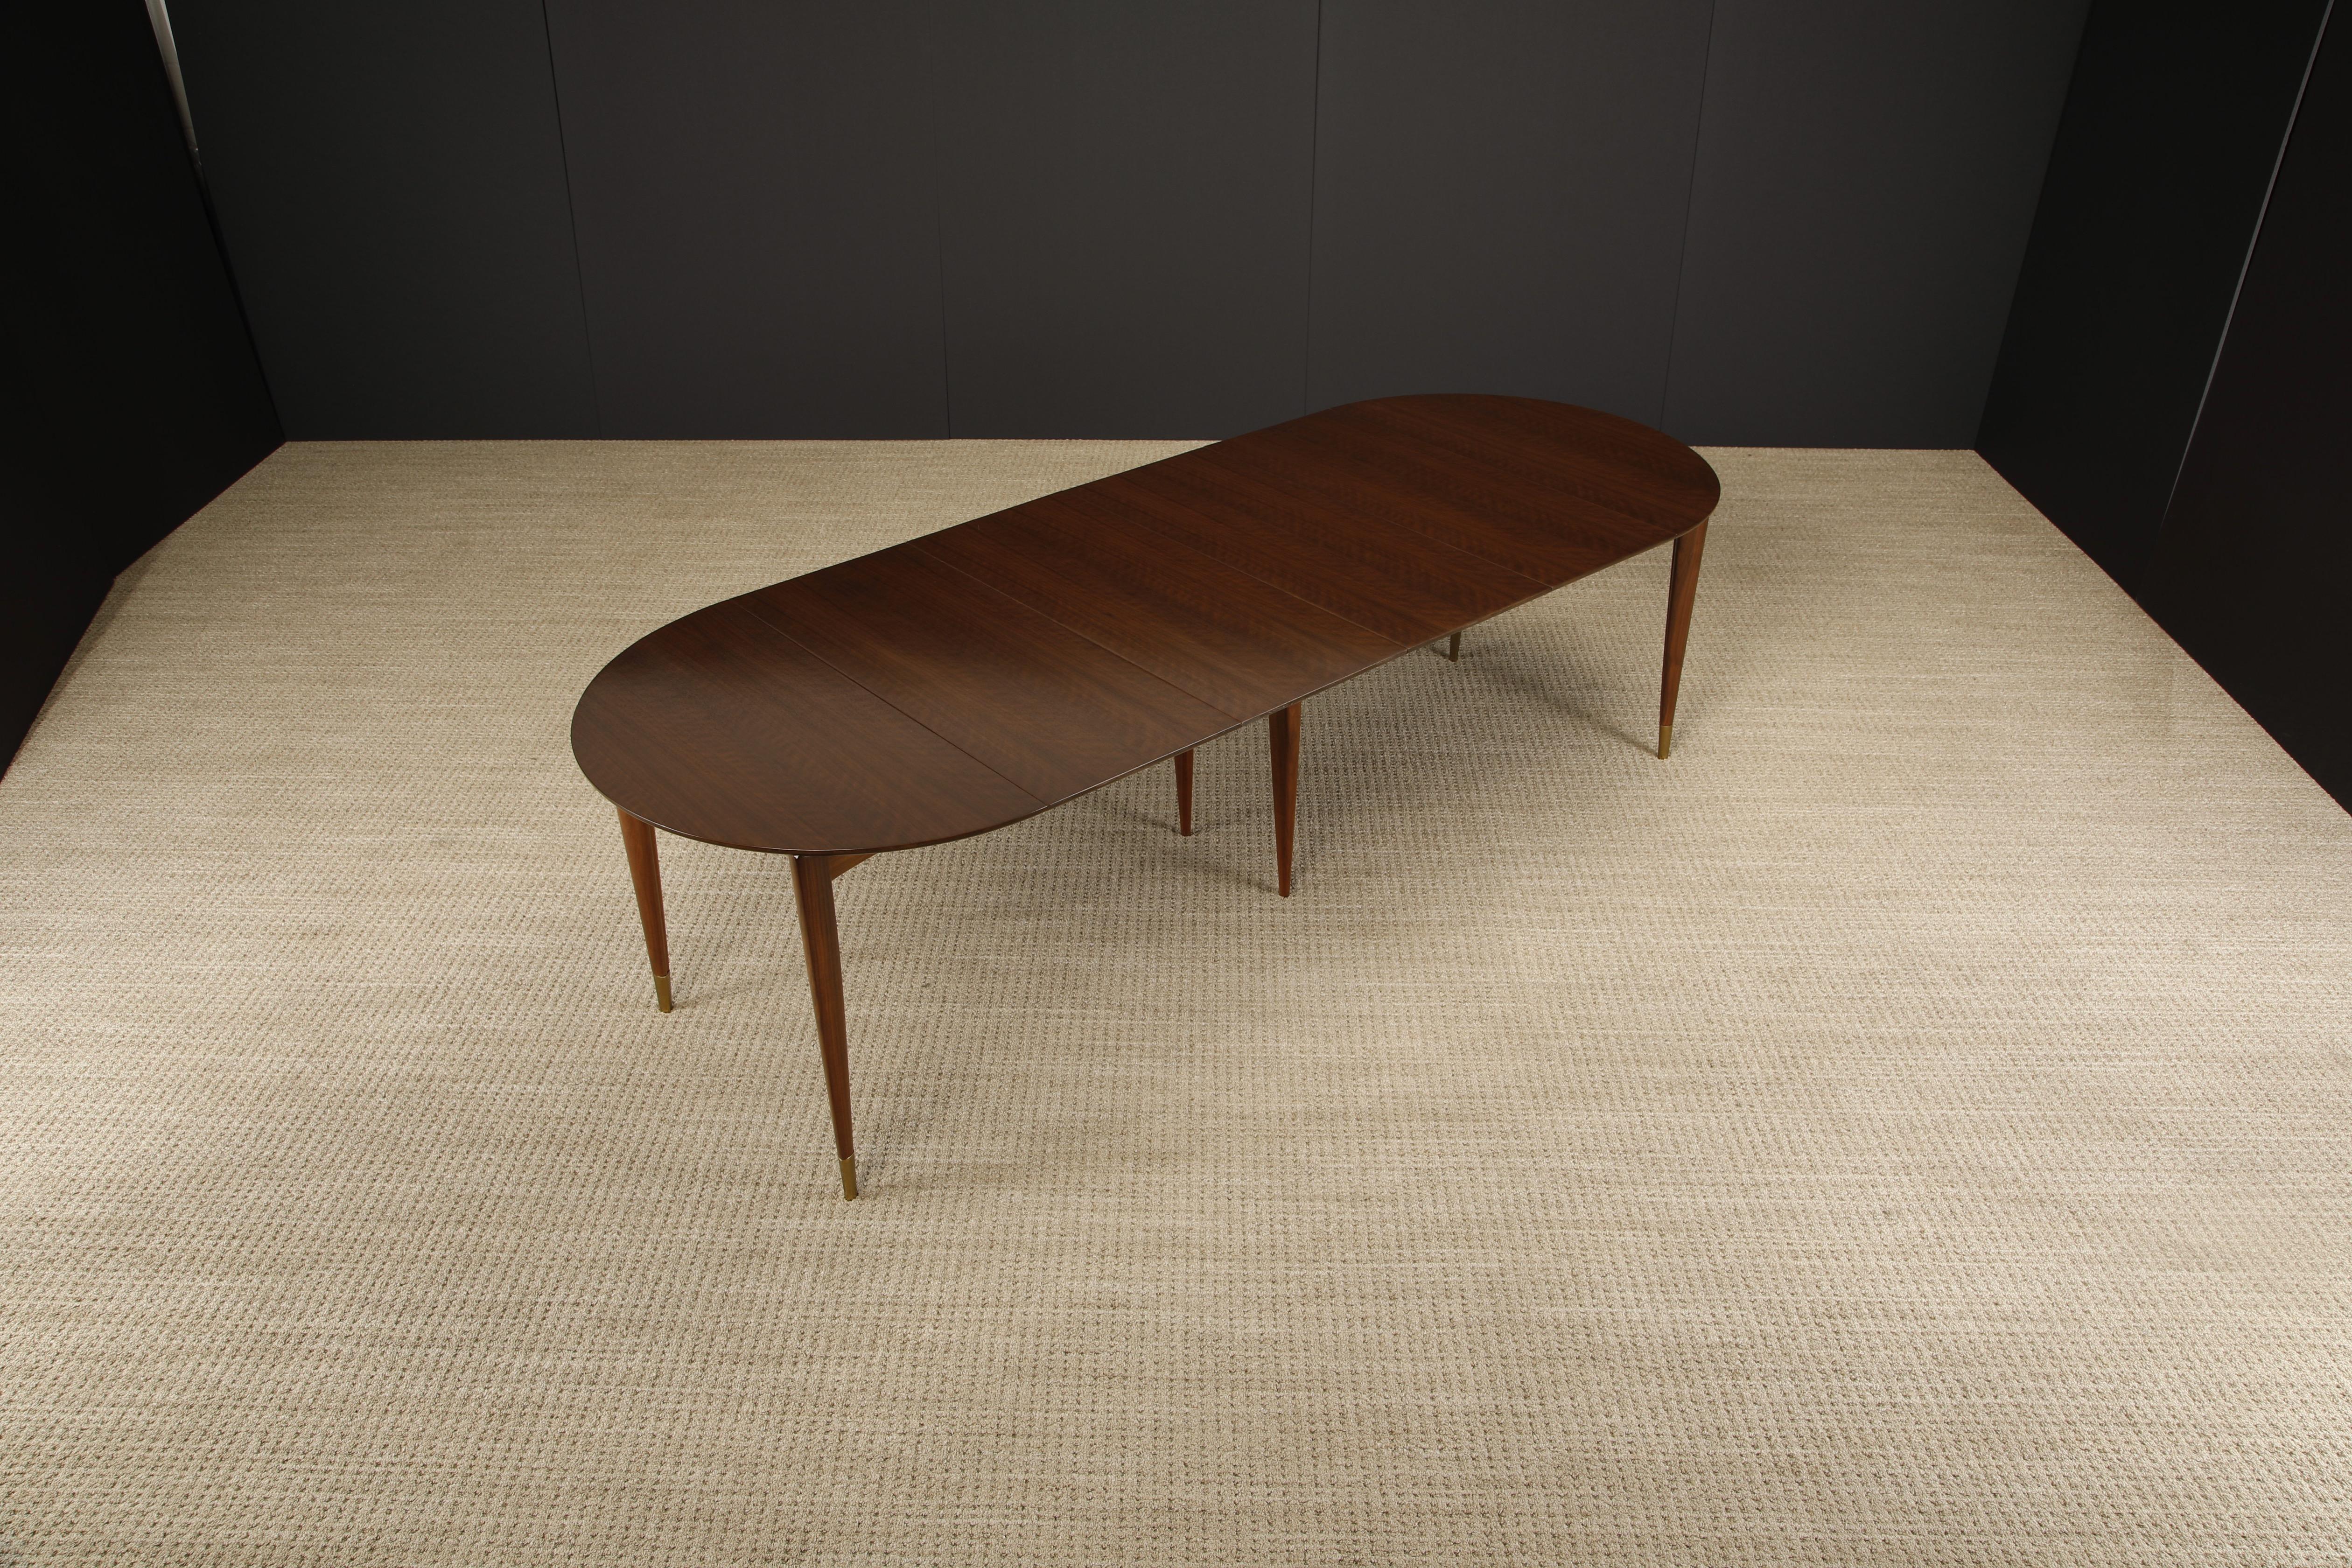 This restored Model 2135 extendable dining table with four leaves by Gio Ponti for Singer & Sons features gorgeously veined Italian Walnut with sculpted legs to Gio Ponti's signature form, capped with brass sabots. 

Documented in the Singer & Sons,